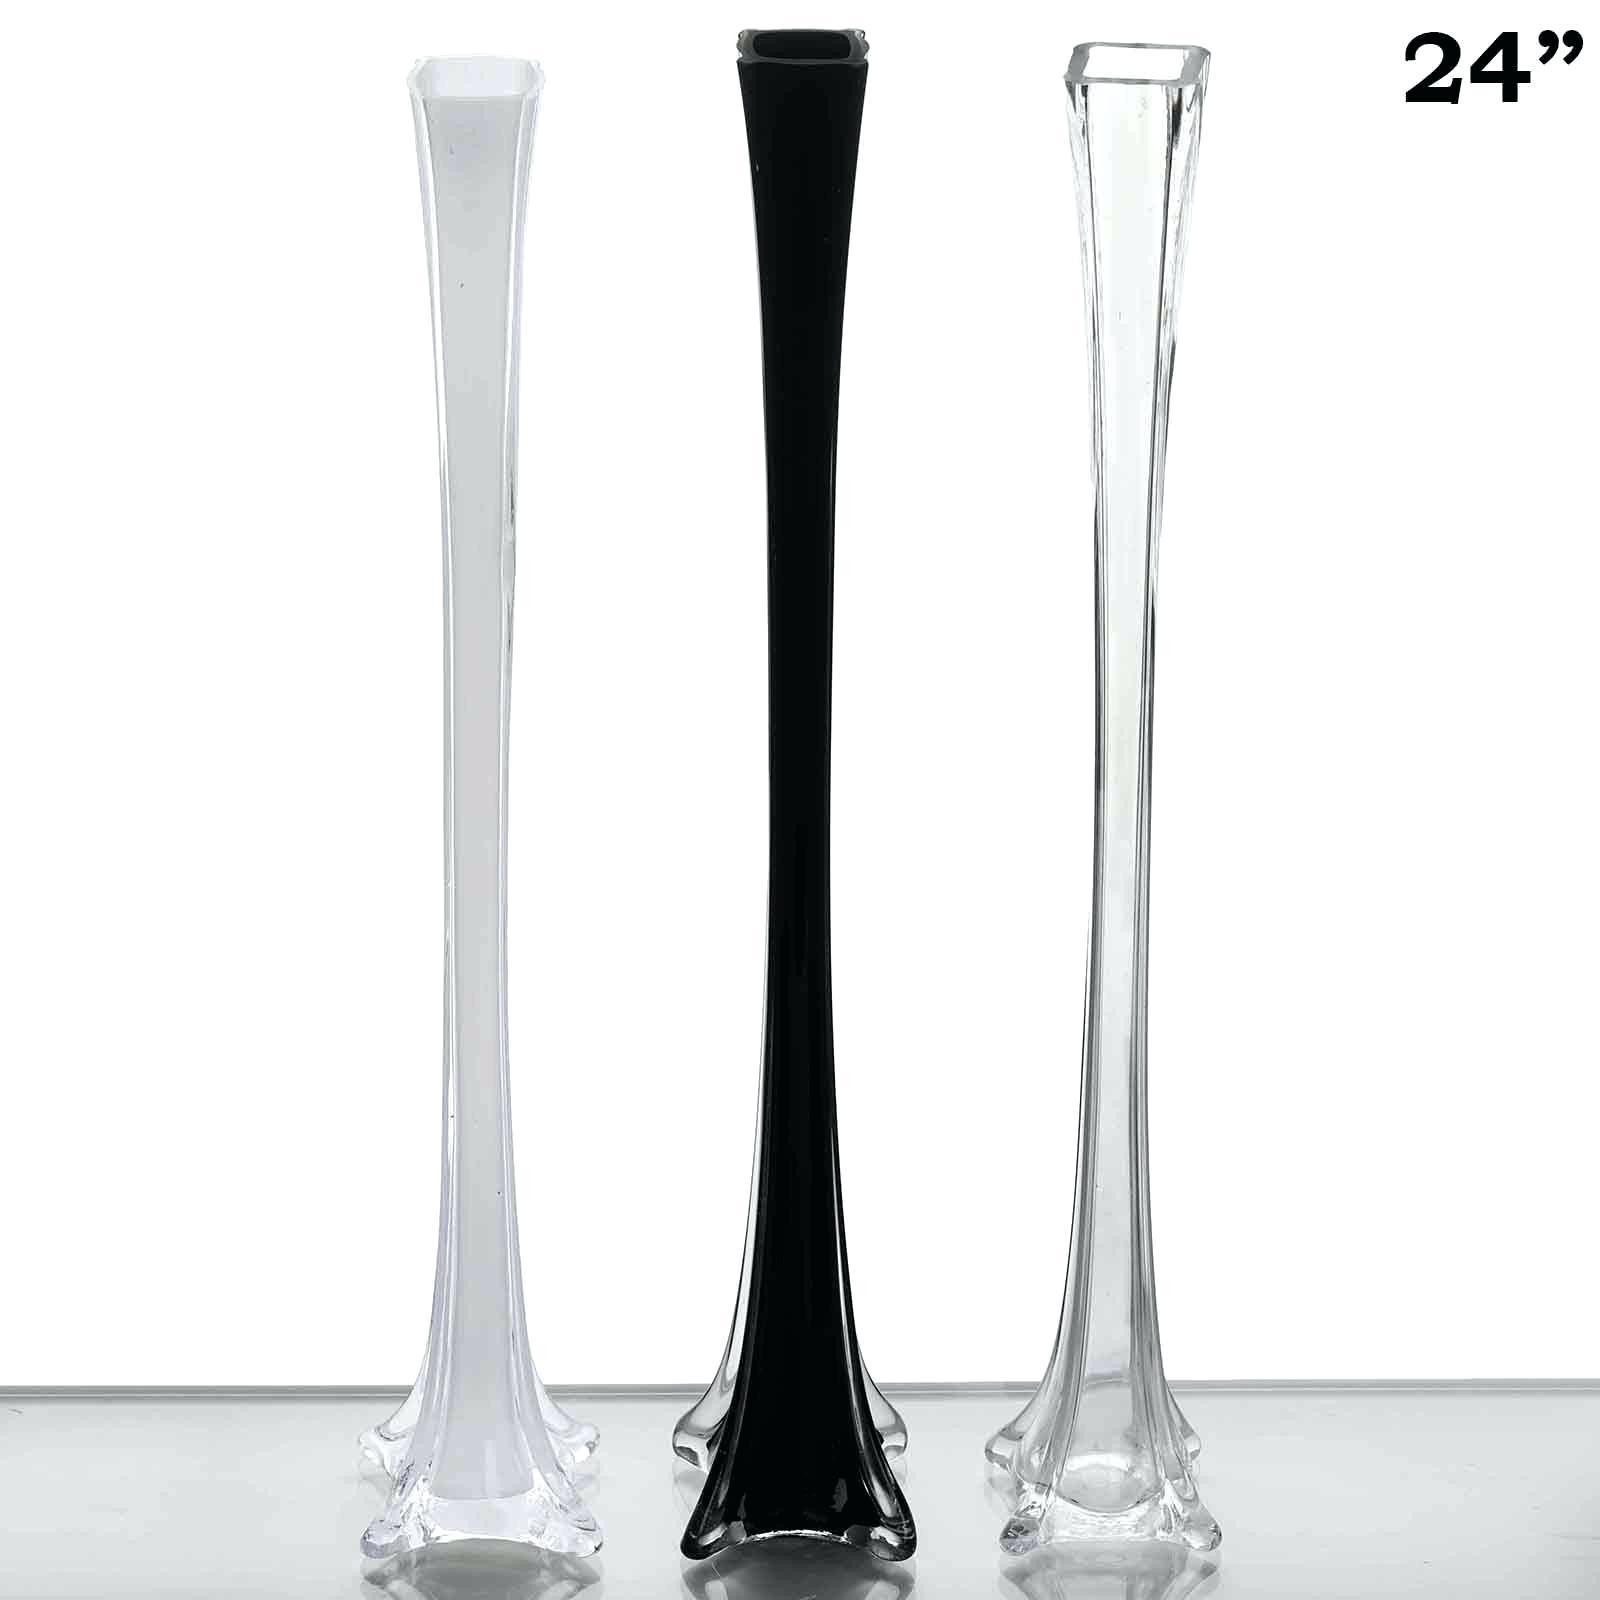 29 Popular 24 Inch Vases In Bulk 2024 free download 24 inch vases in bulk of glass vases with lids collection 24 inch vases bulk 23 5 flared inside glass vases with lids images fantastic chair decor ideas from living room vases wholesale awes